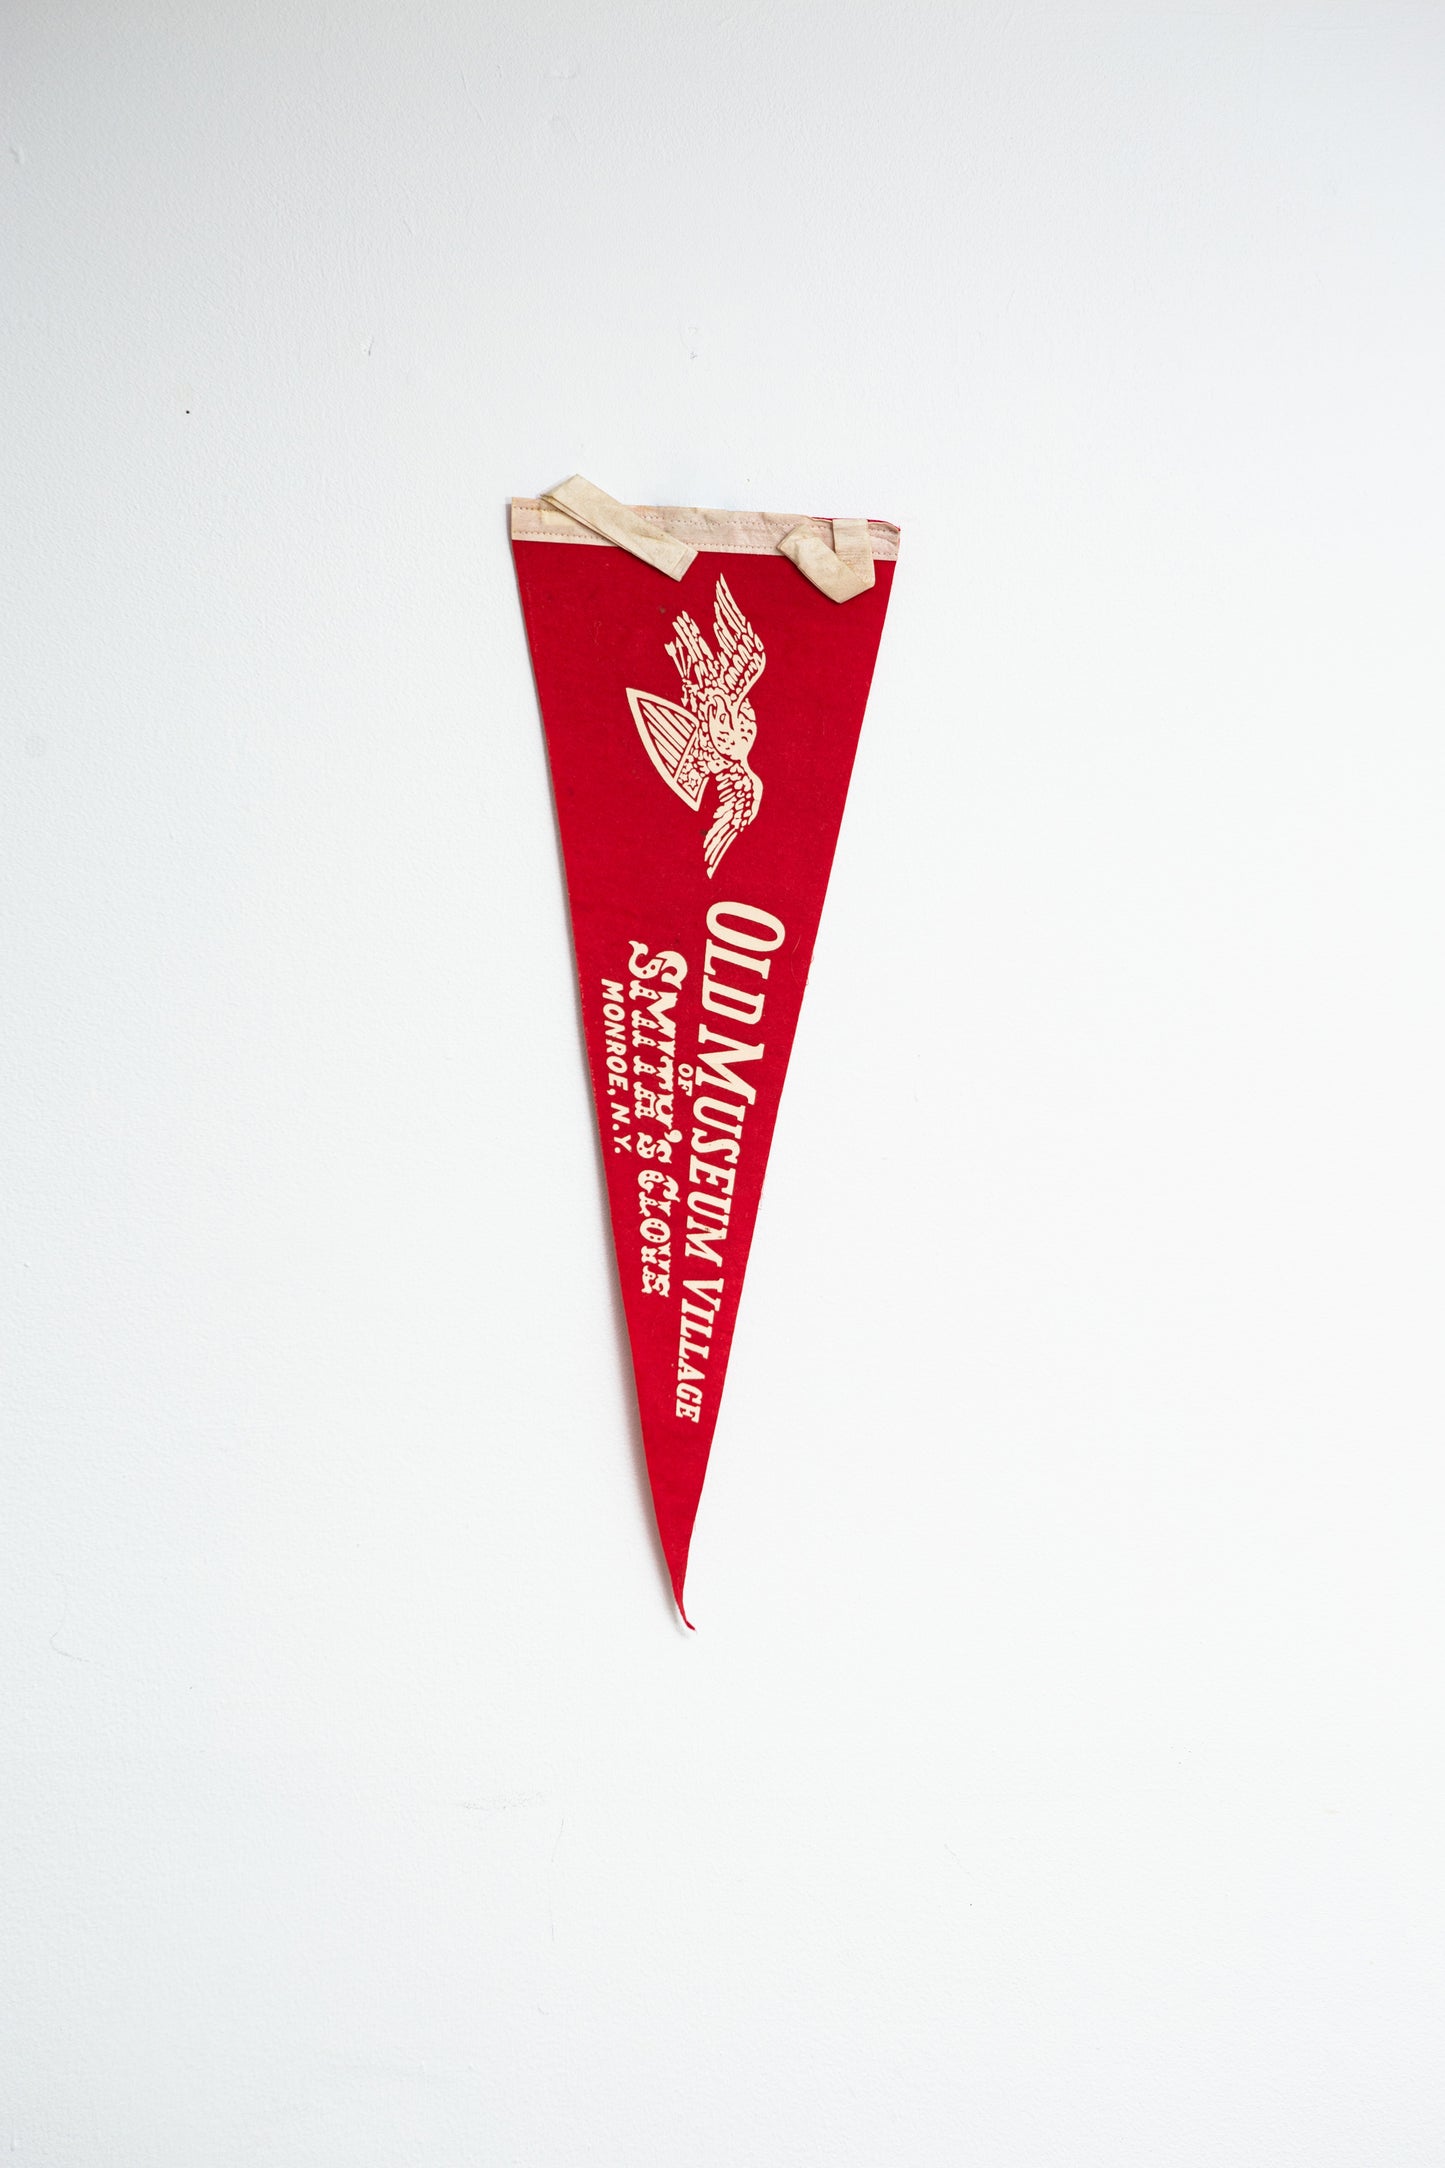 1950's Old Museum Village of Smith's Clove pennant